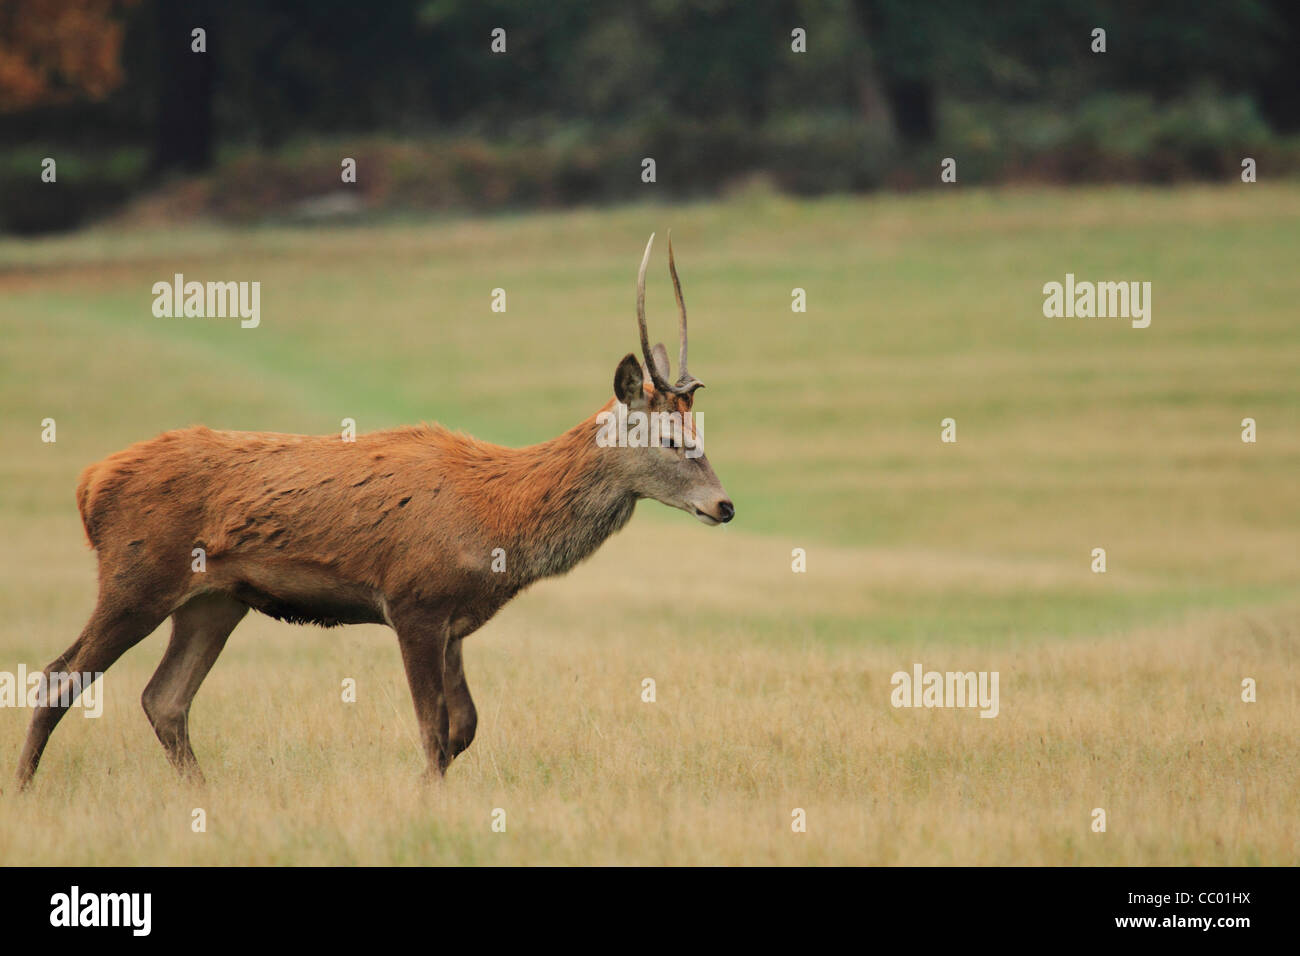 Red stag deer with small horns walking in grass field Stock Photo